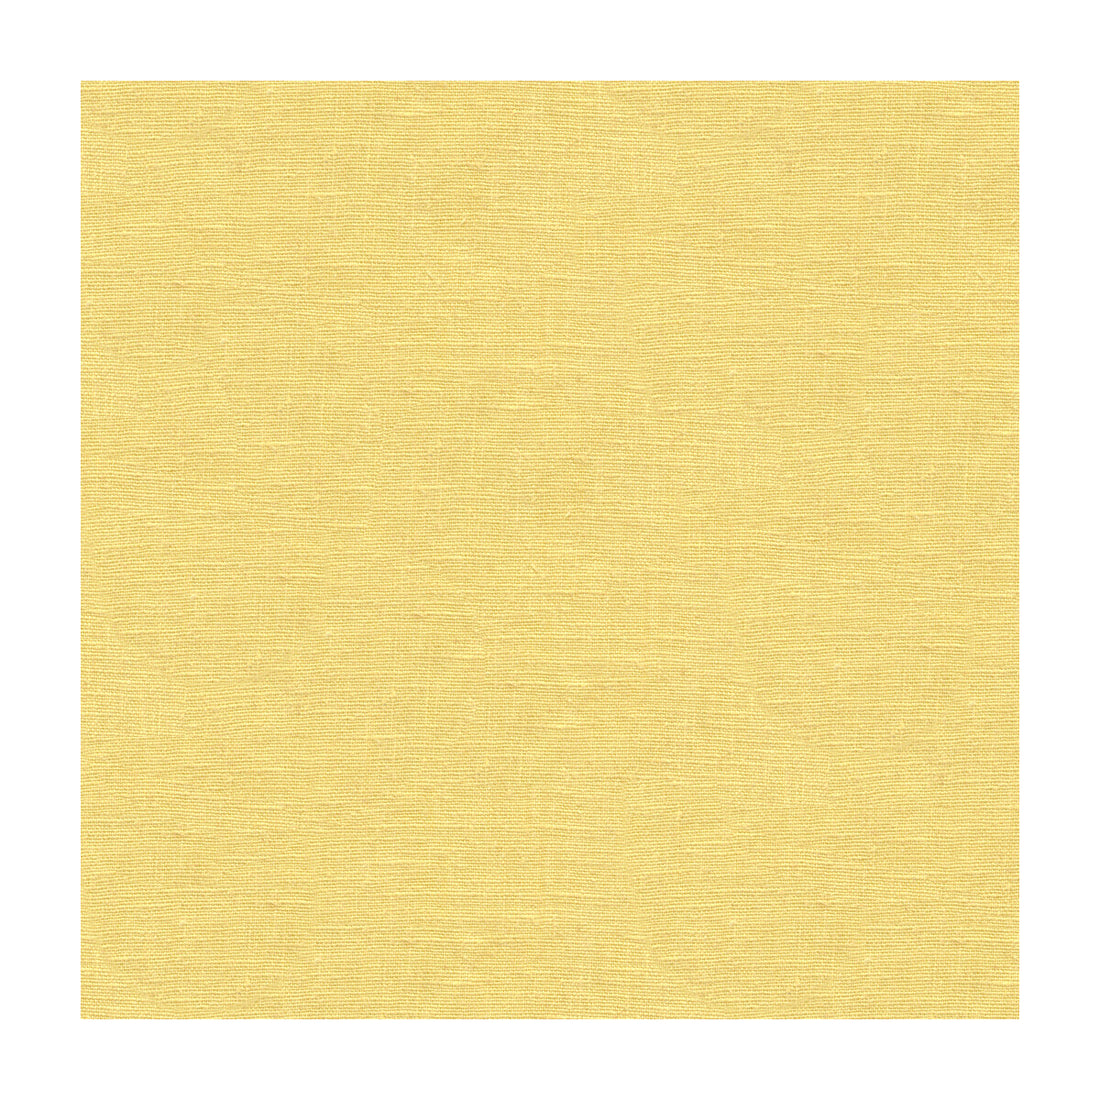 Dublin fabric in corn color - pattern 32344.40.0 - by Kravet Basics in the Perfect Plains collection